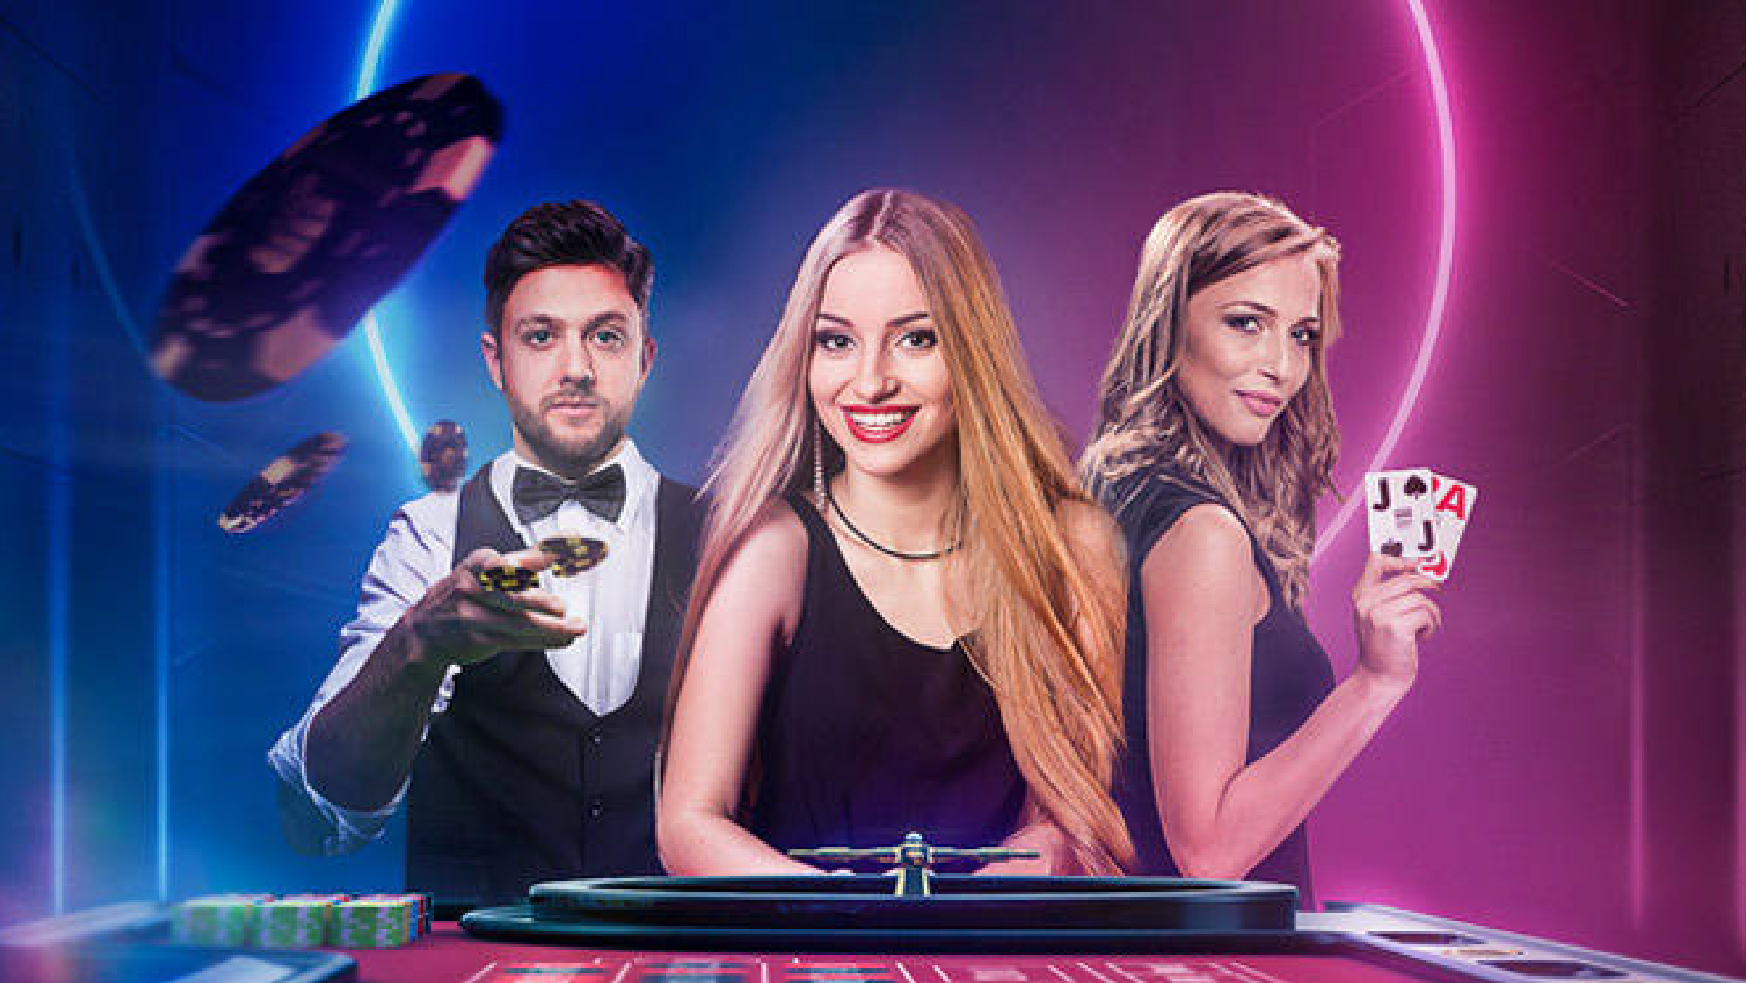 Variety of Games in Online Live Casino Malaysia 75532 - Variety of Games in Online Live Casino Malaysia